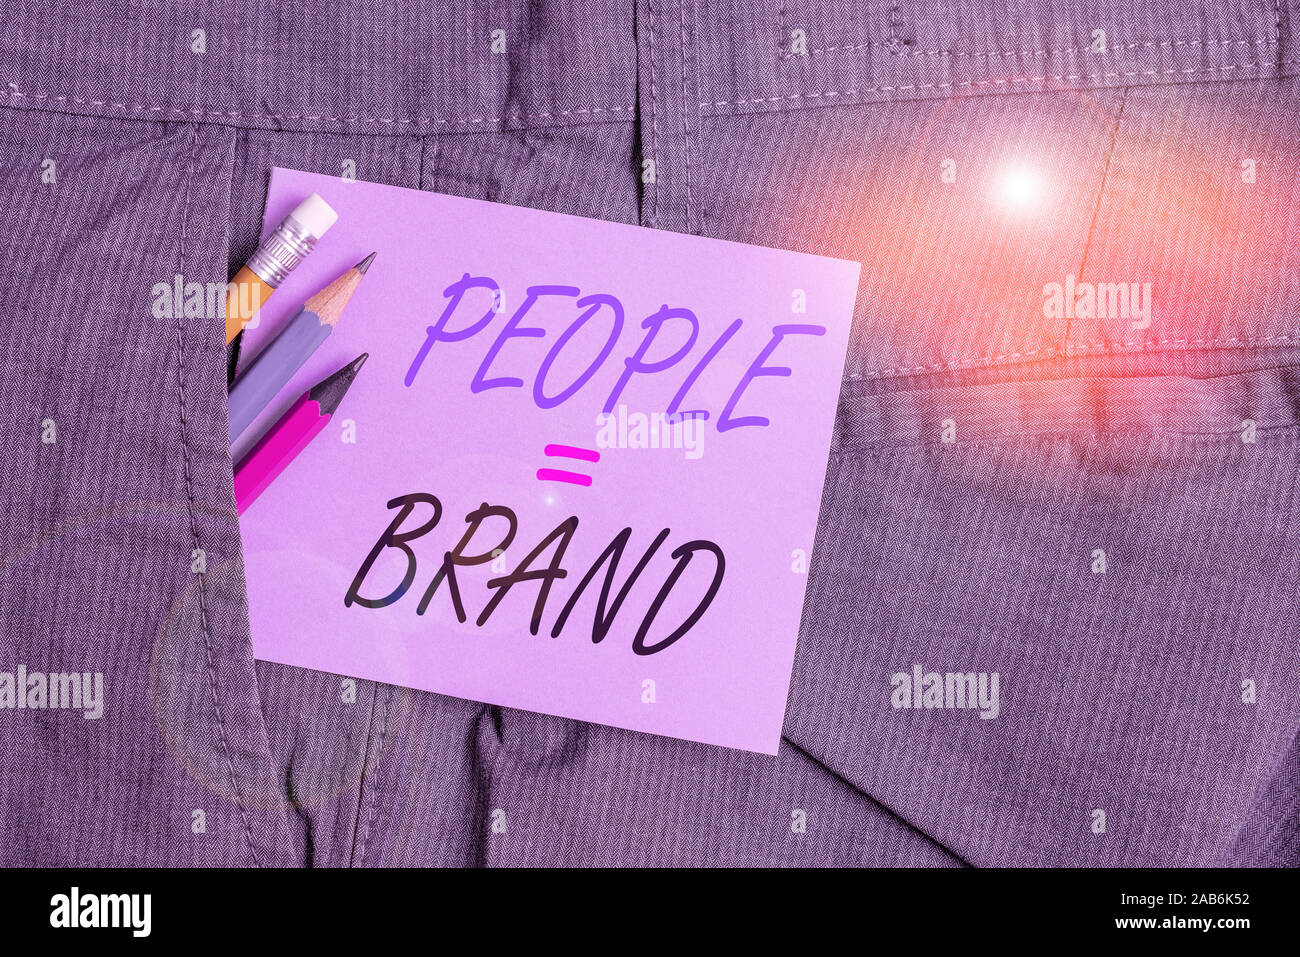 Writing note showing People Brand. Business concept for Personal Branding Defining demonstratingality through the labels Writing equipment and purple Stock Photo